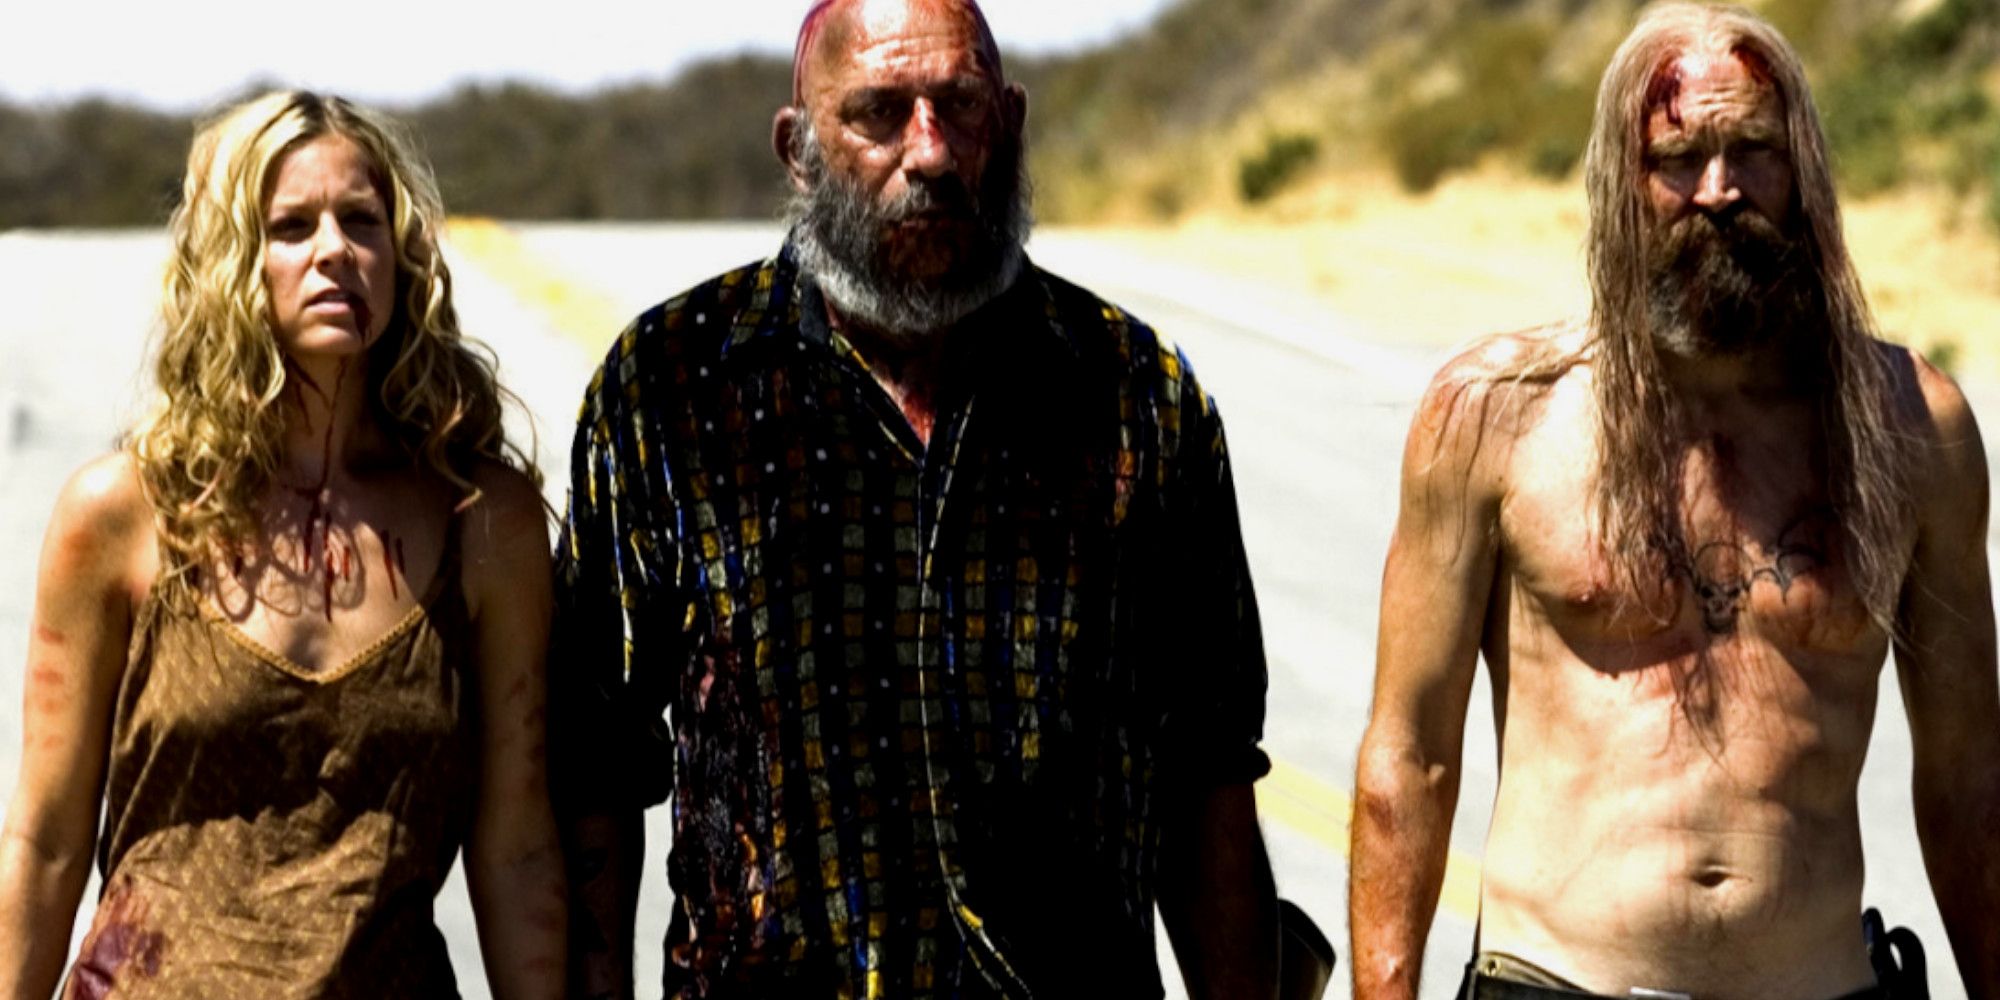 The three main characters in The Devil's Rejects